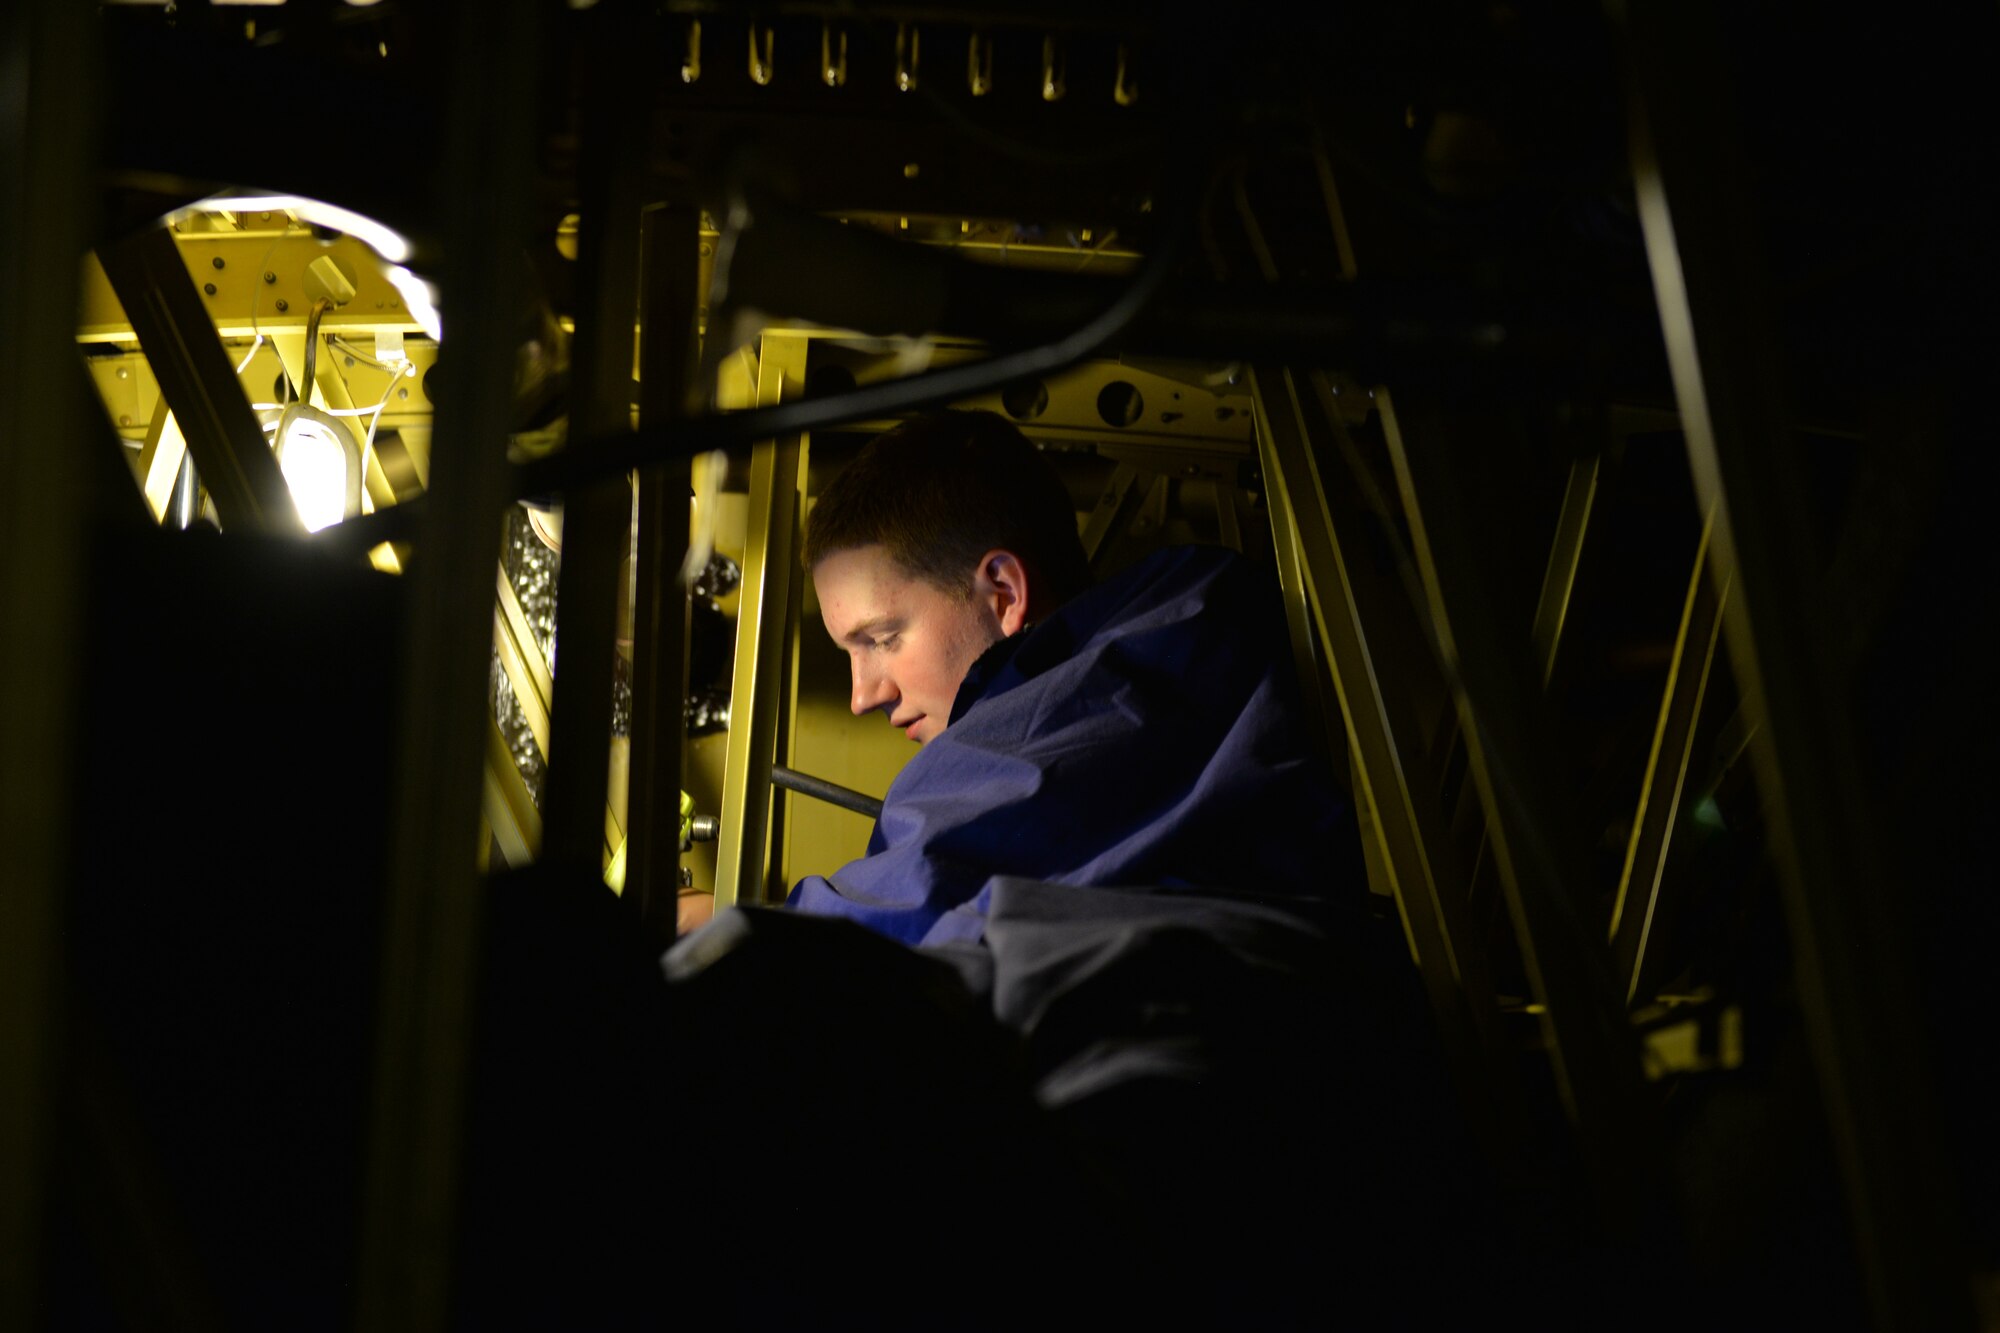 Airman Storm Harris, 361st Training Squadron aircraft fuel systems apprentice course student learns to diagnose and repair fuel system malfunctions at Sheppard Air Force Base, Texas, July 11, 2017. This training ensures that any malfunction problems are corrected before the aircraft takes off.  (U.S. Air Force photo/Liz H. Colunga)